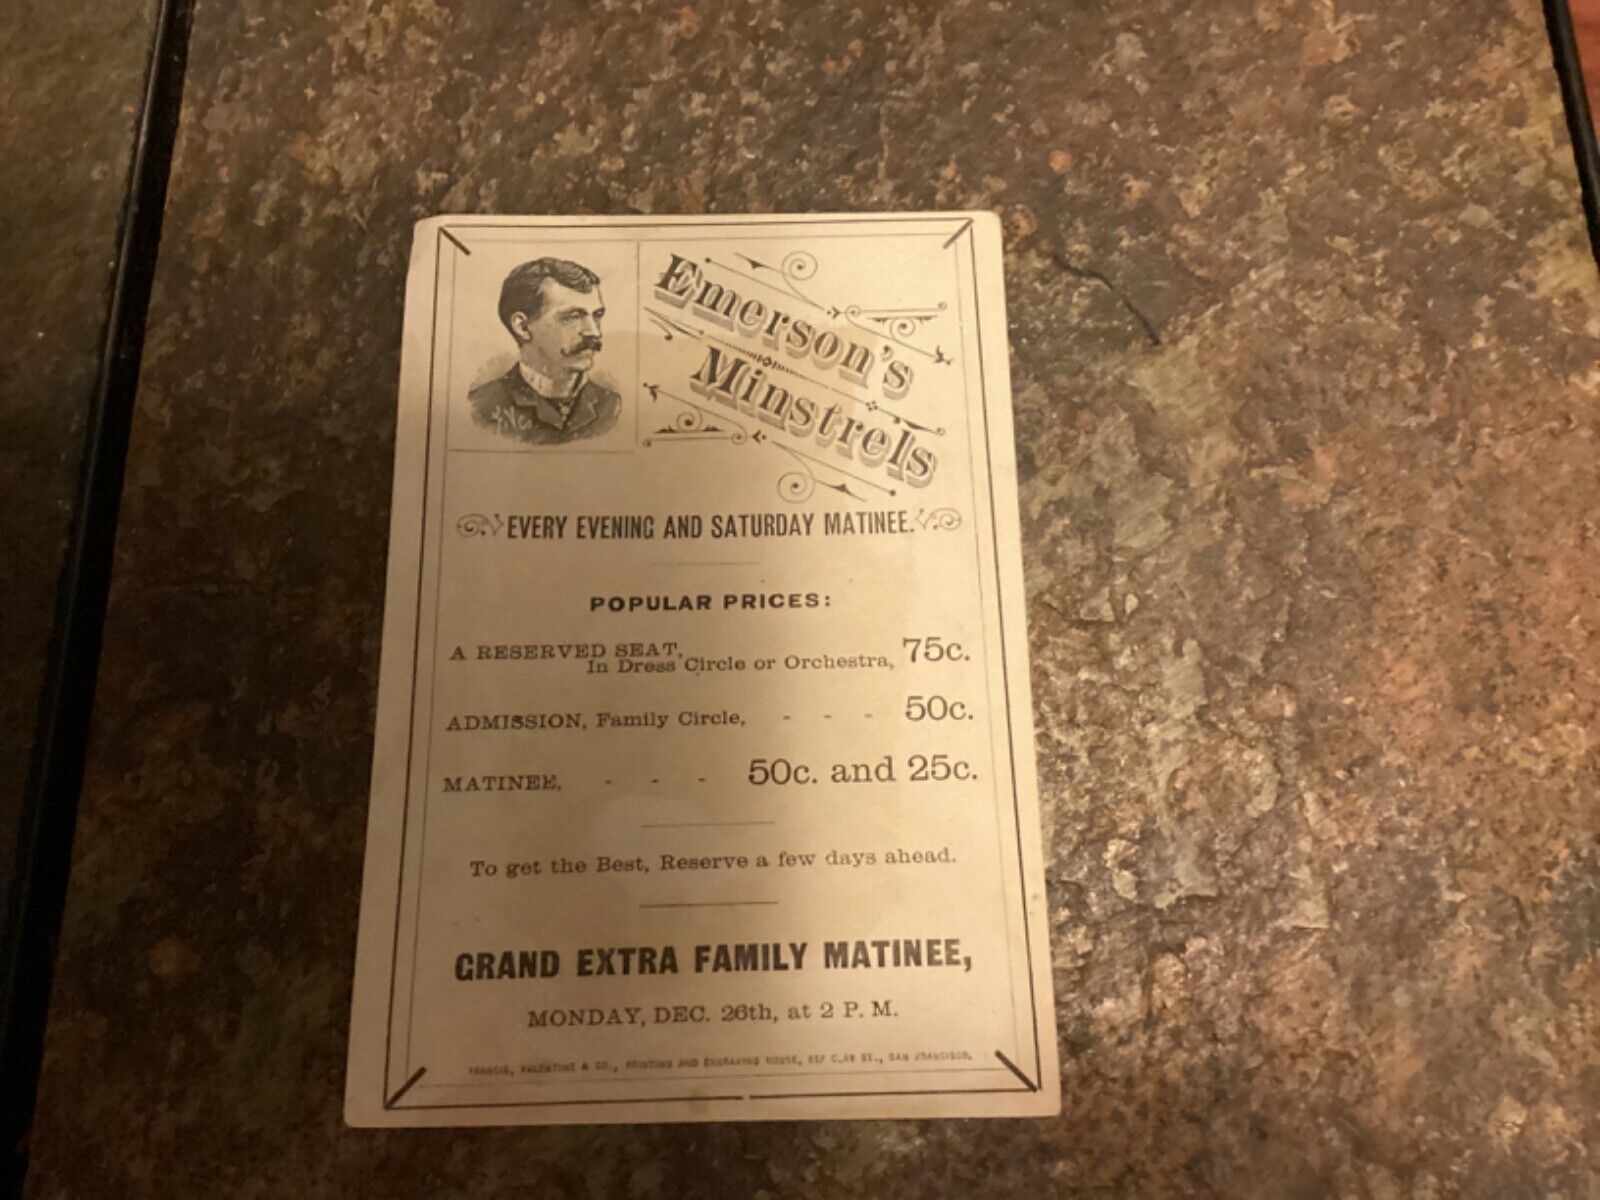 Rare 1880s Emerson's Minstrels Illustrated Price Card